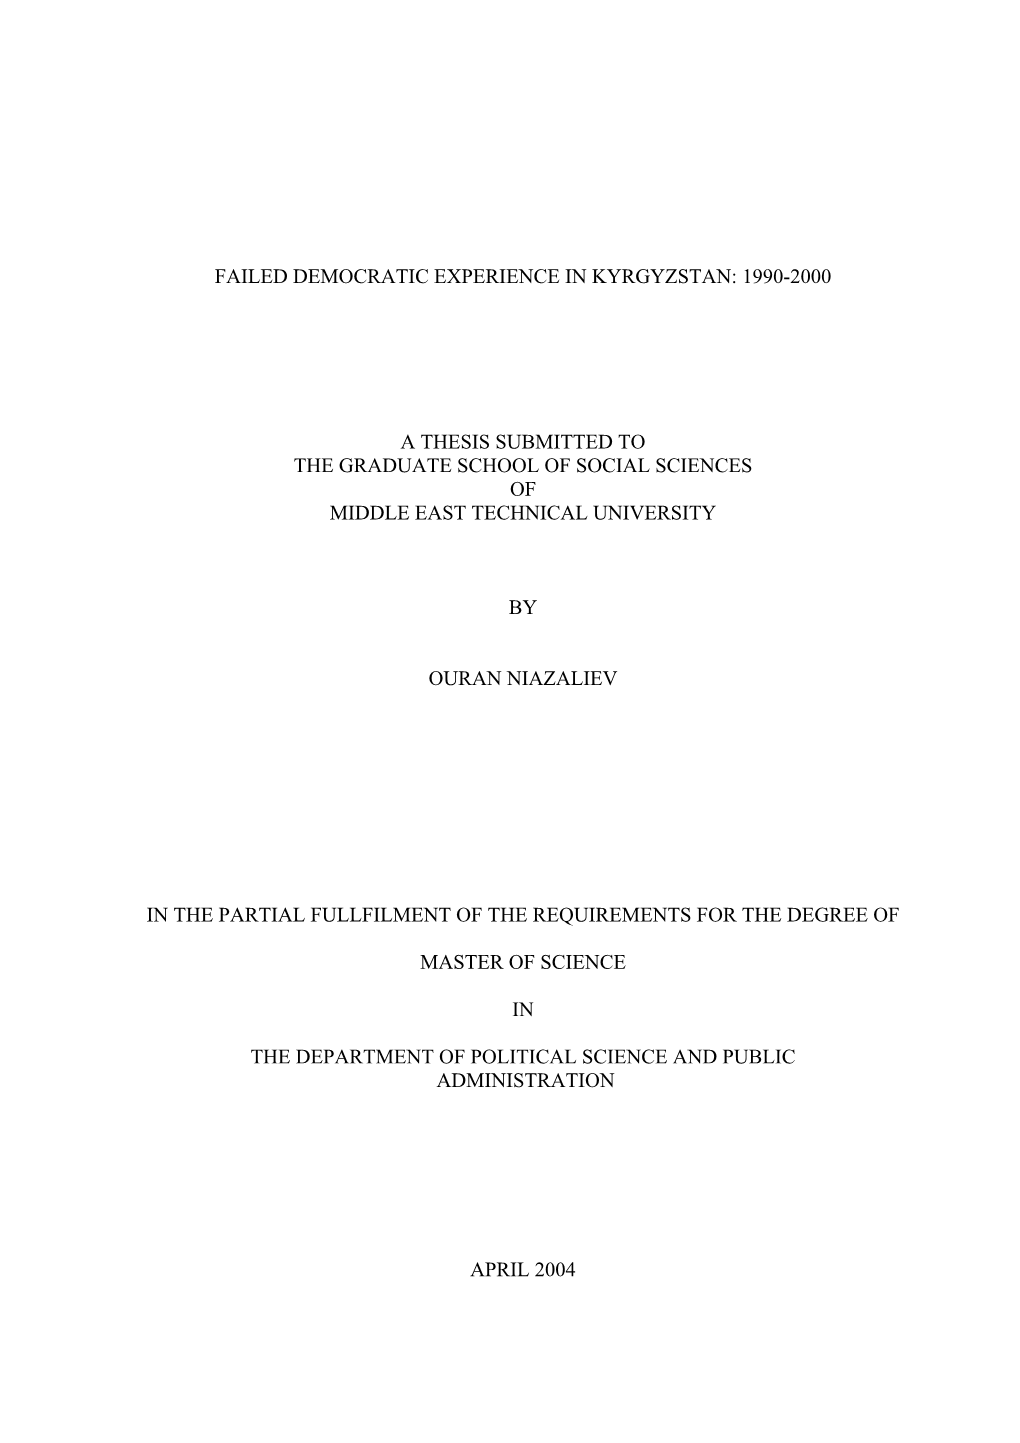 Failed Democratic Experience in Kyrgyzstan: 1990-2000 a Thesis Submitted to the Graduate School of Social Sciences of Middle Ea